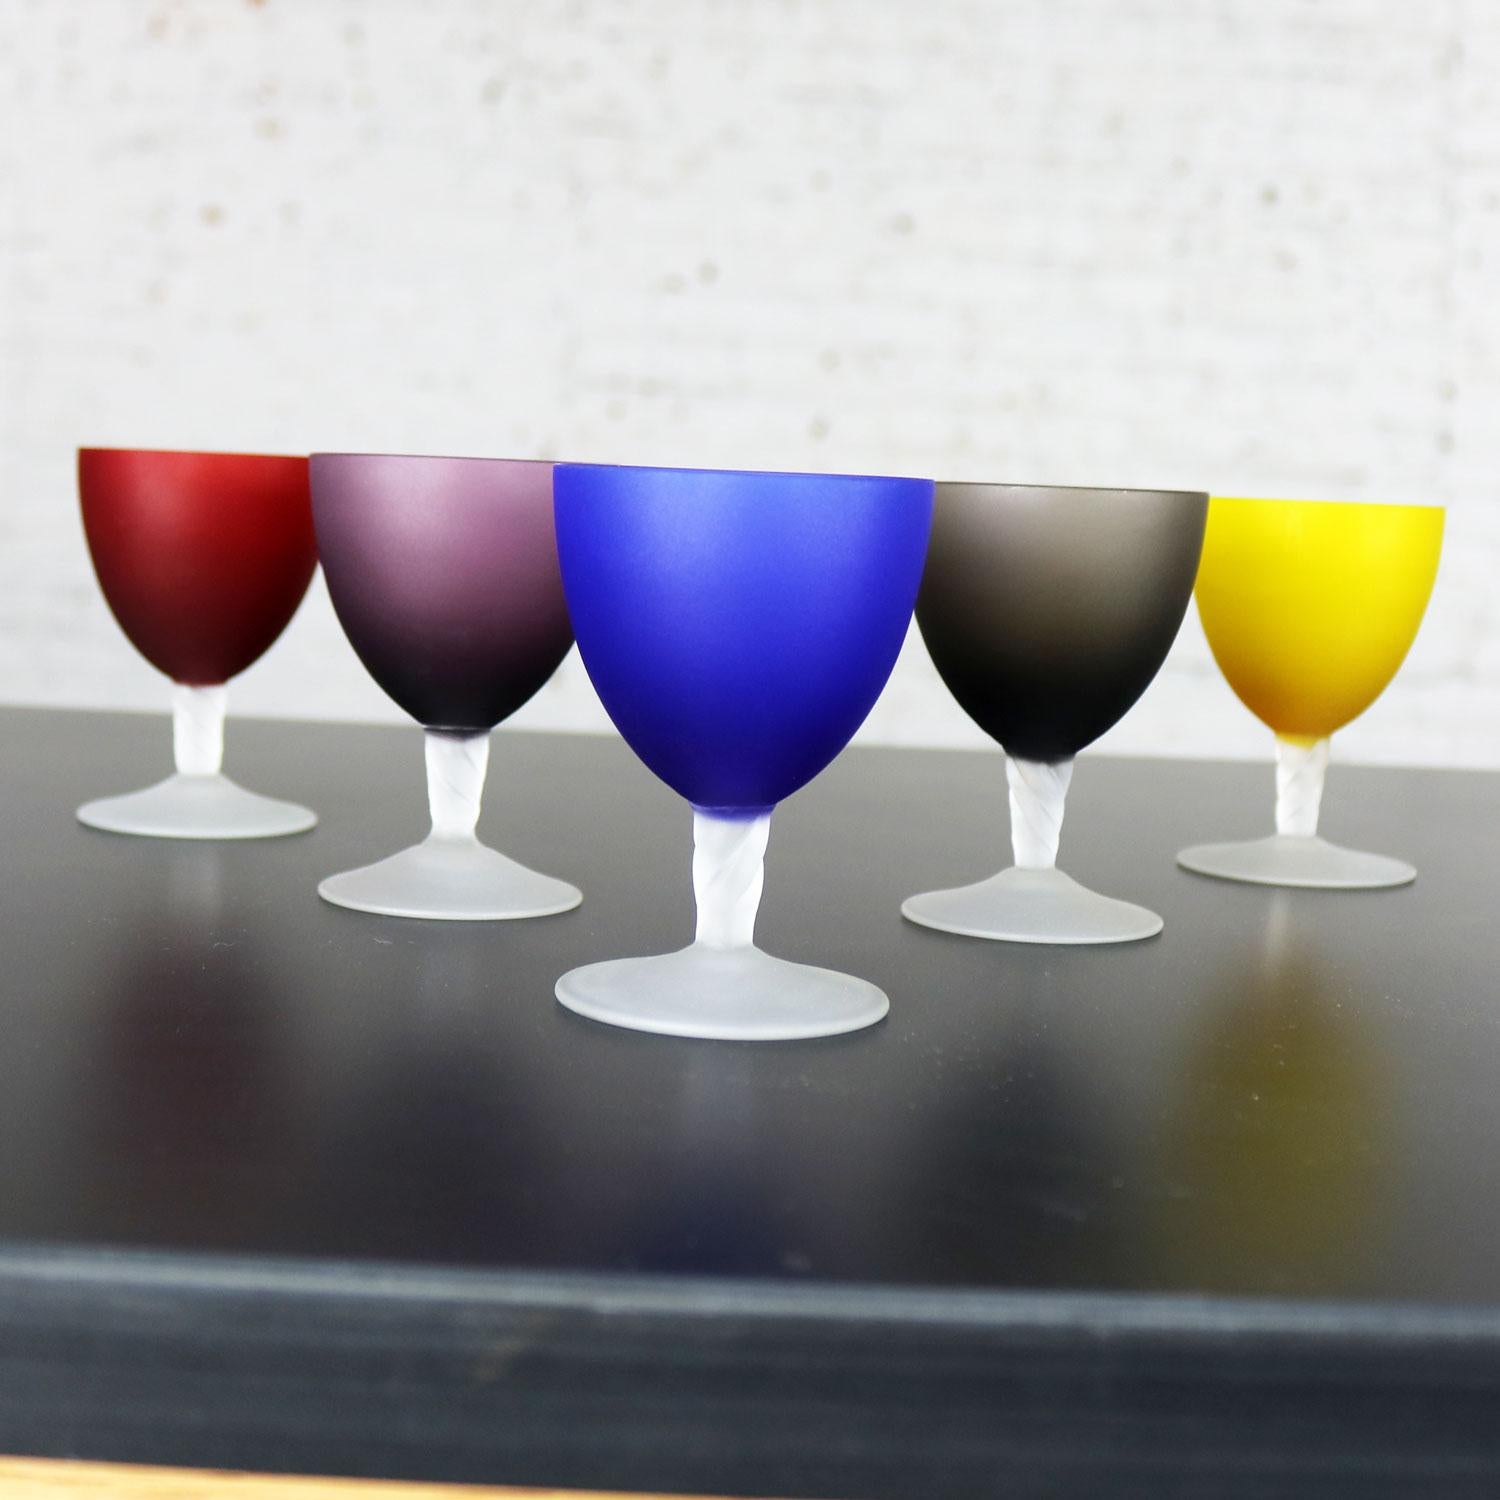 Set of 5 Small Multicolored Frosted Glass Wine Coupes or Cordial Glasses 1